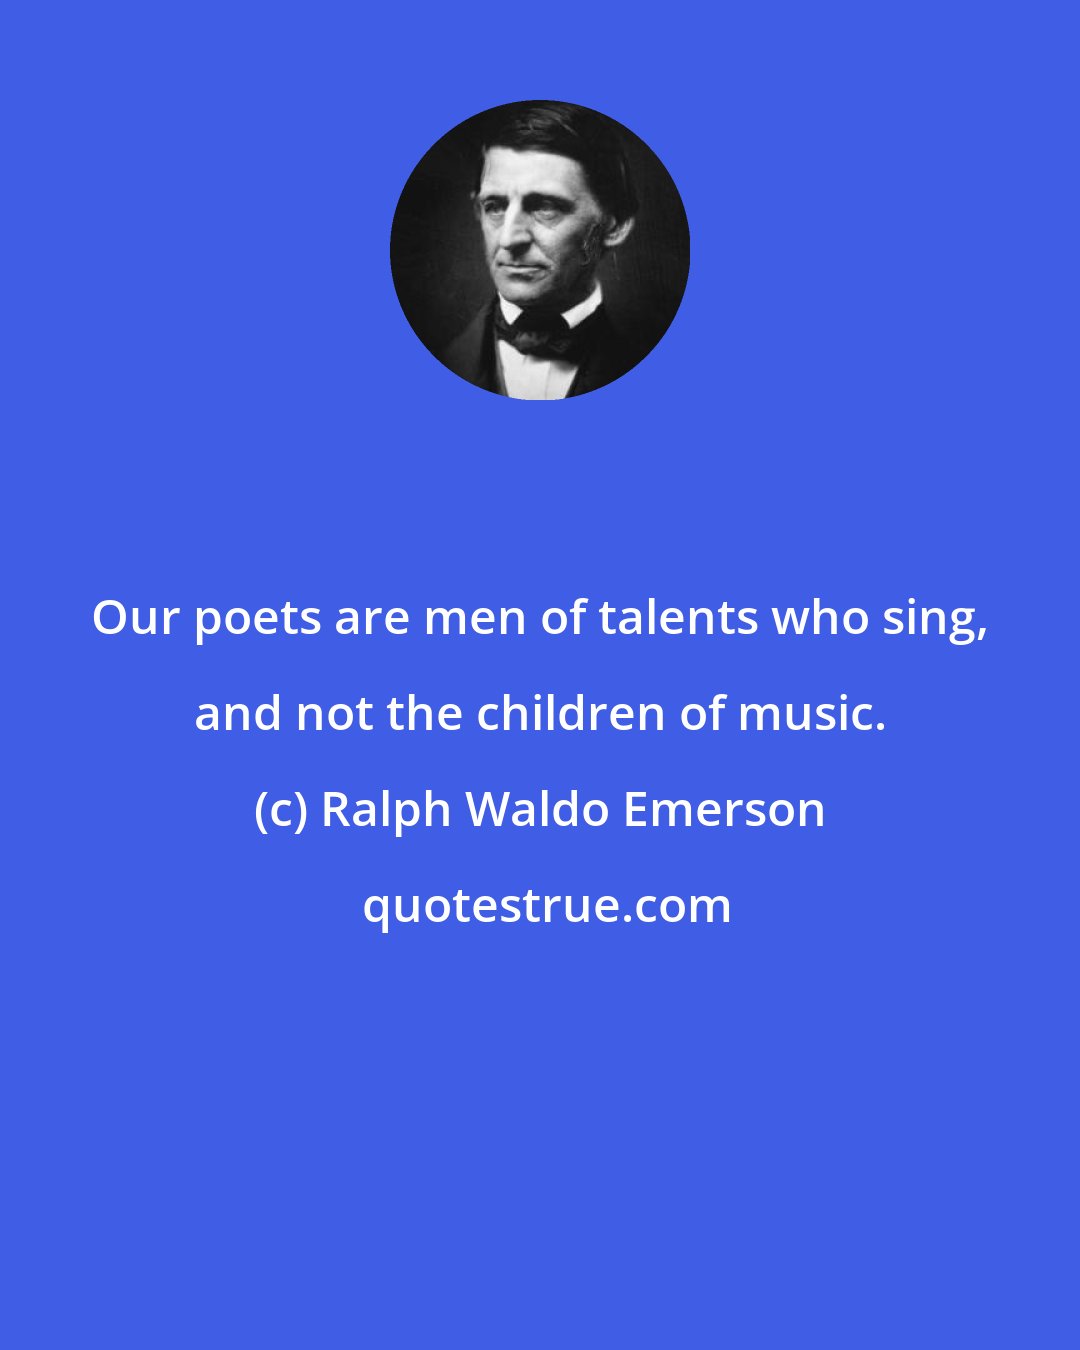 Ralph Waldo Emerson: Our poets are men of talents who sing, and not the children of music.